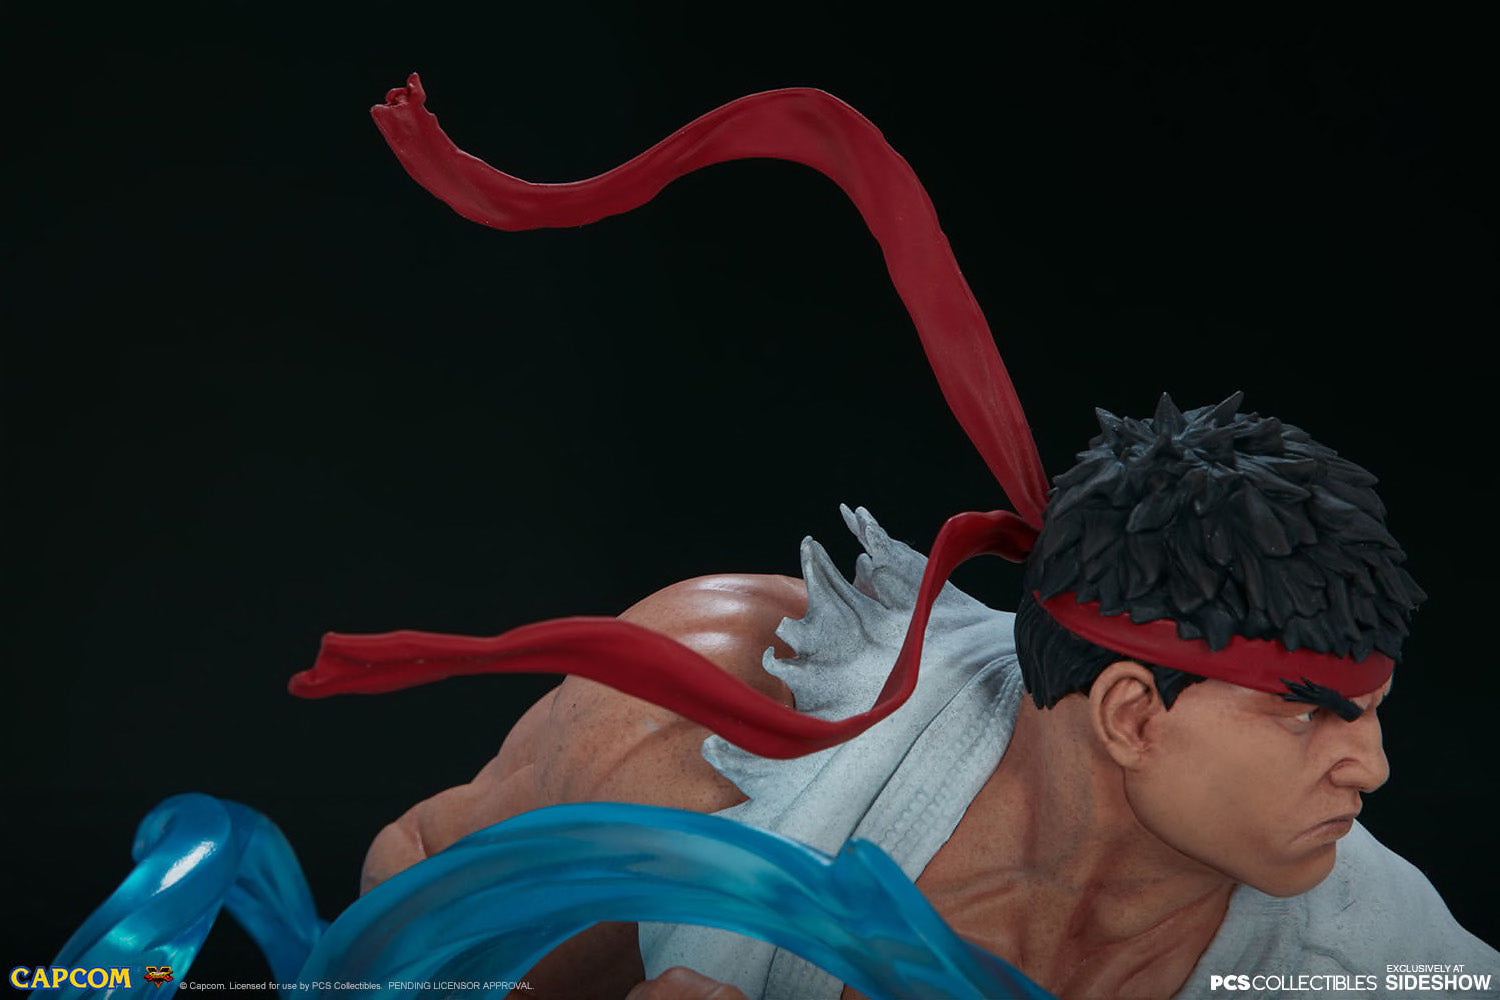 Pop Culture Shock Collectibles - Street Fighter - Ryu Ultra Statue (1/4 Scale) - Marvelous Toys